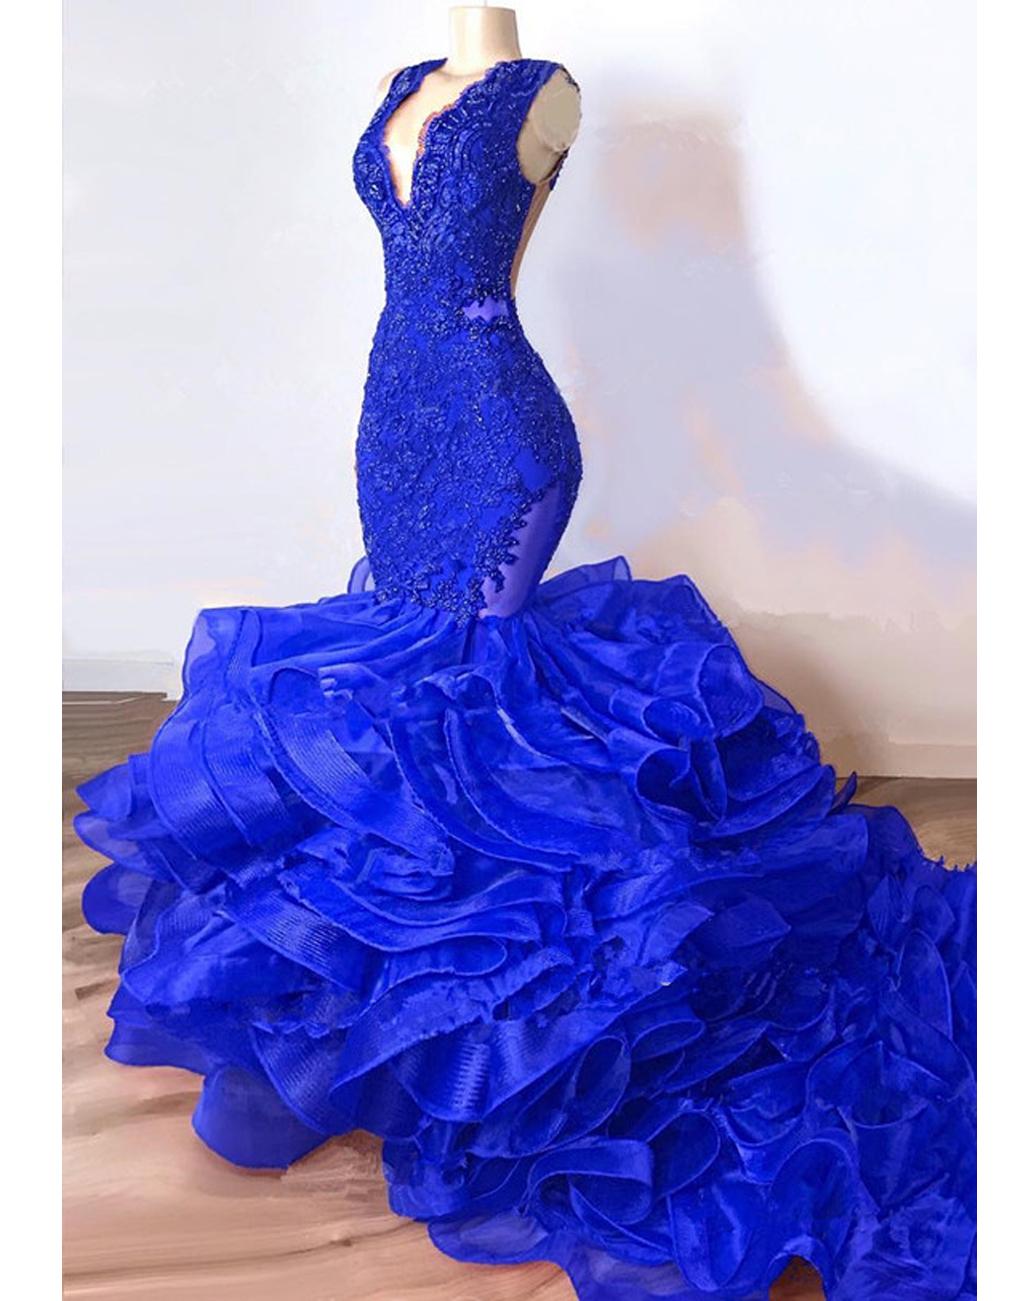 Gorgeous Royal Blue Ruffles Mermaid Prom Dresses 2021 Sexy Sheer Lace Beaded Train Tutu African Trumpet Evening Party Gowns Robe De Soriee